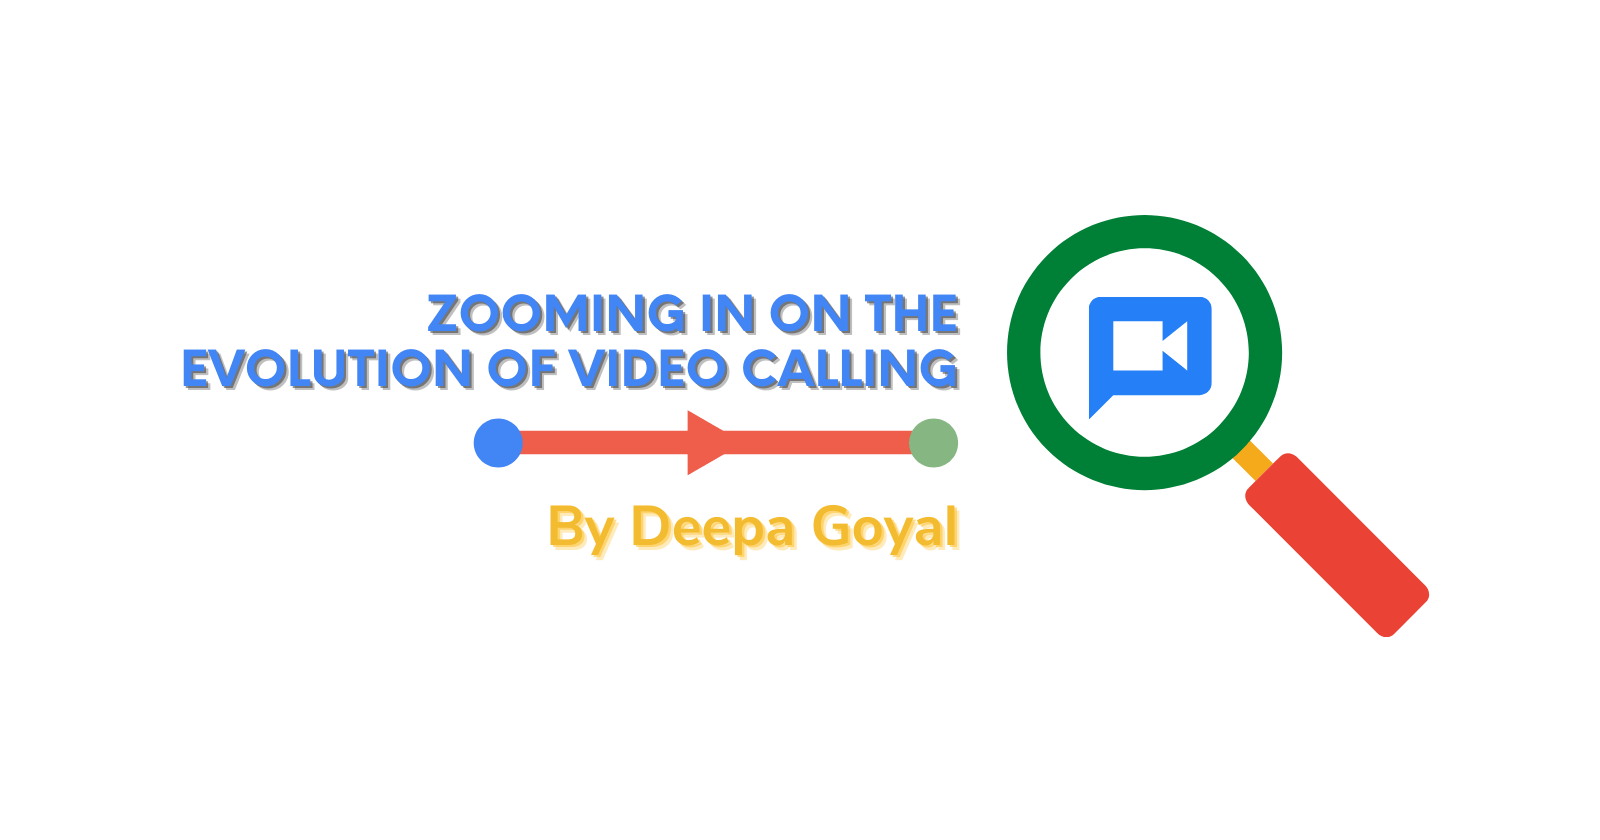 Zooming in on the evolution of Video Calling